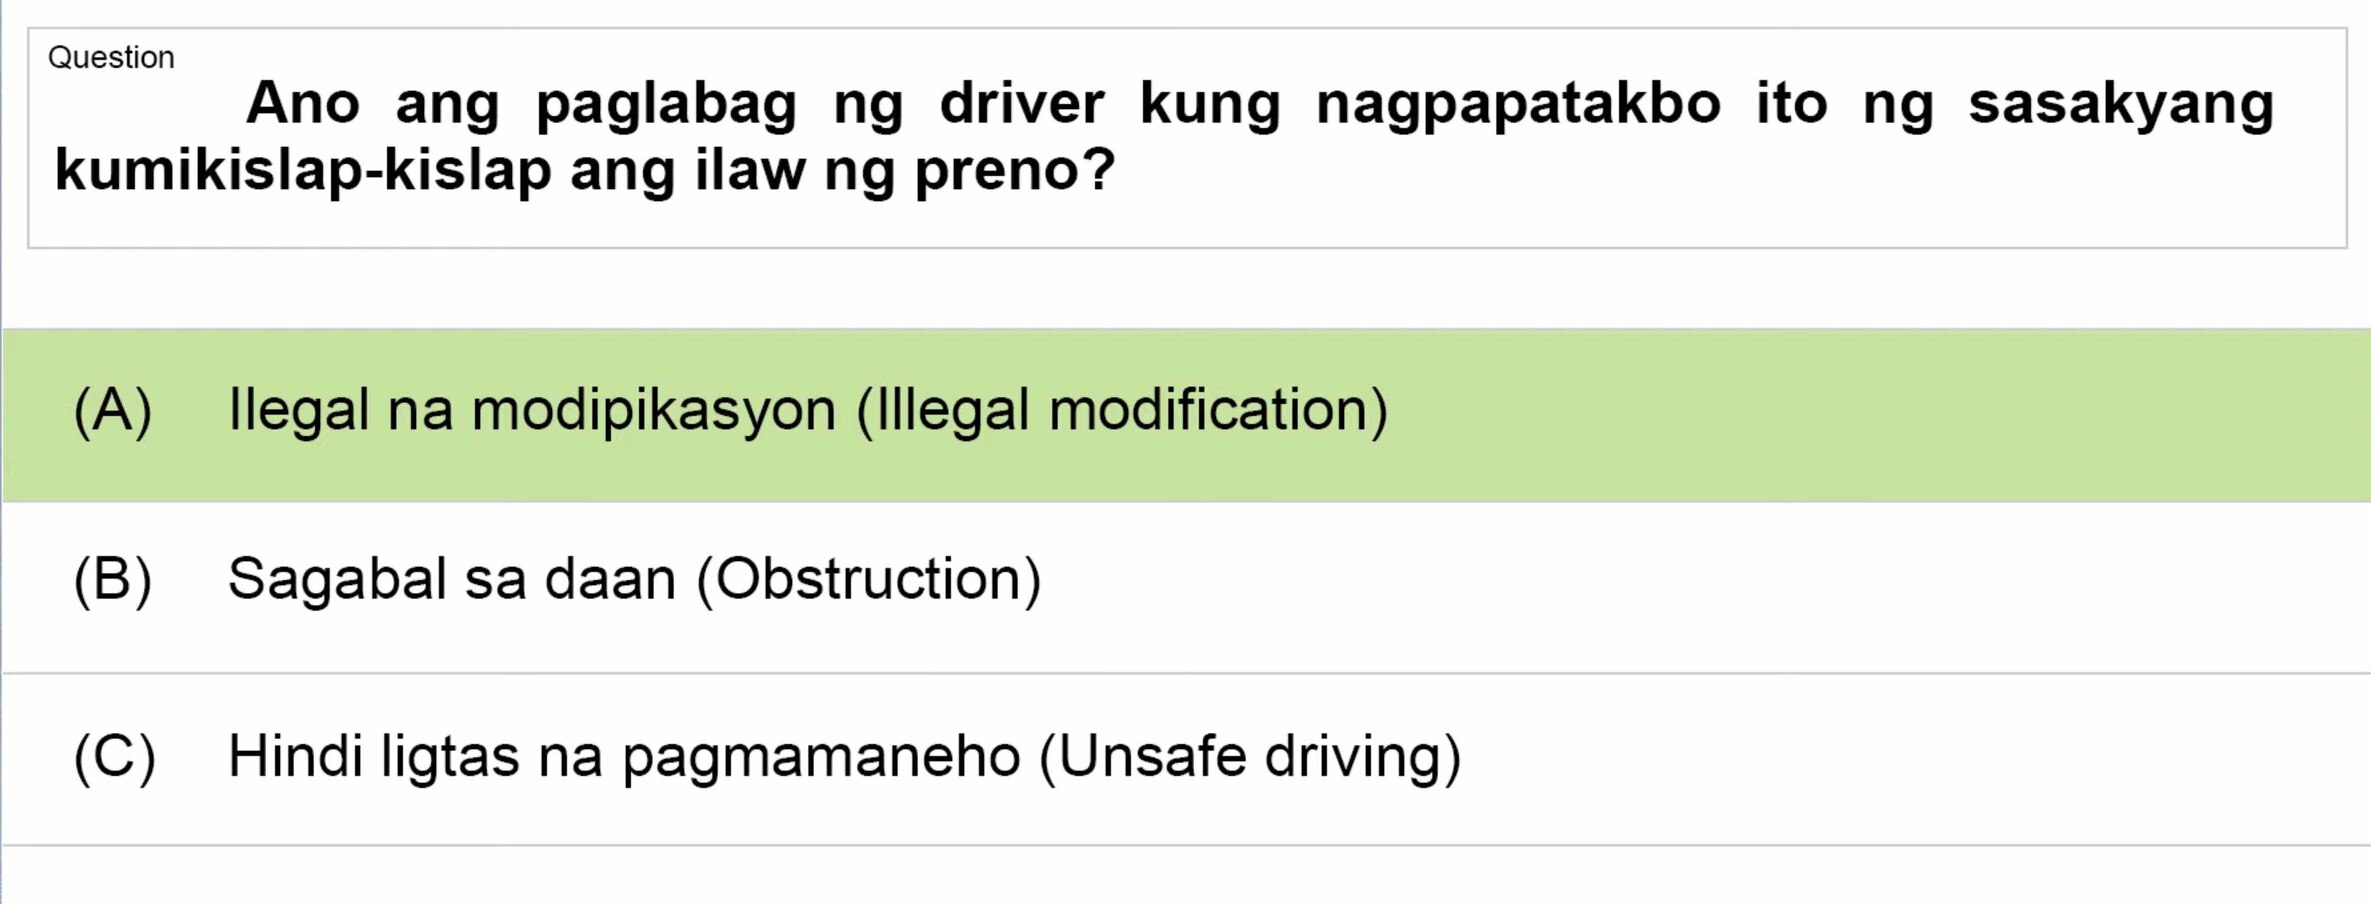 LTO Tagalog non professional exam reviewer light vehicle 1 (36)